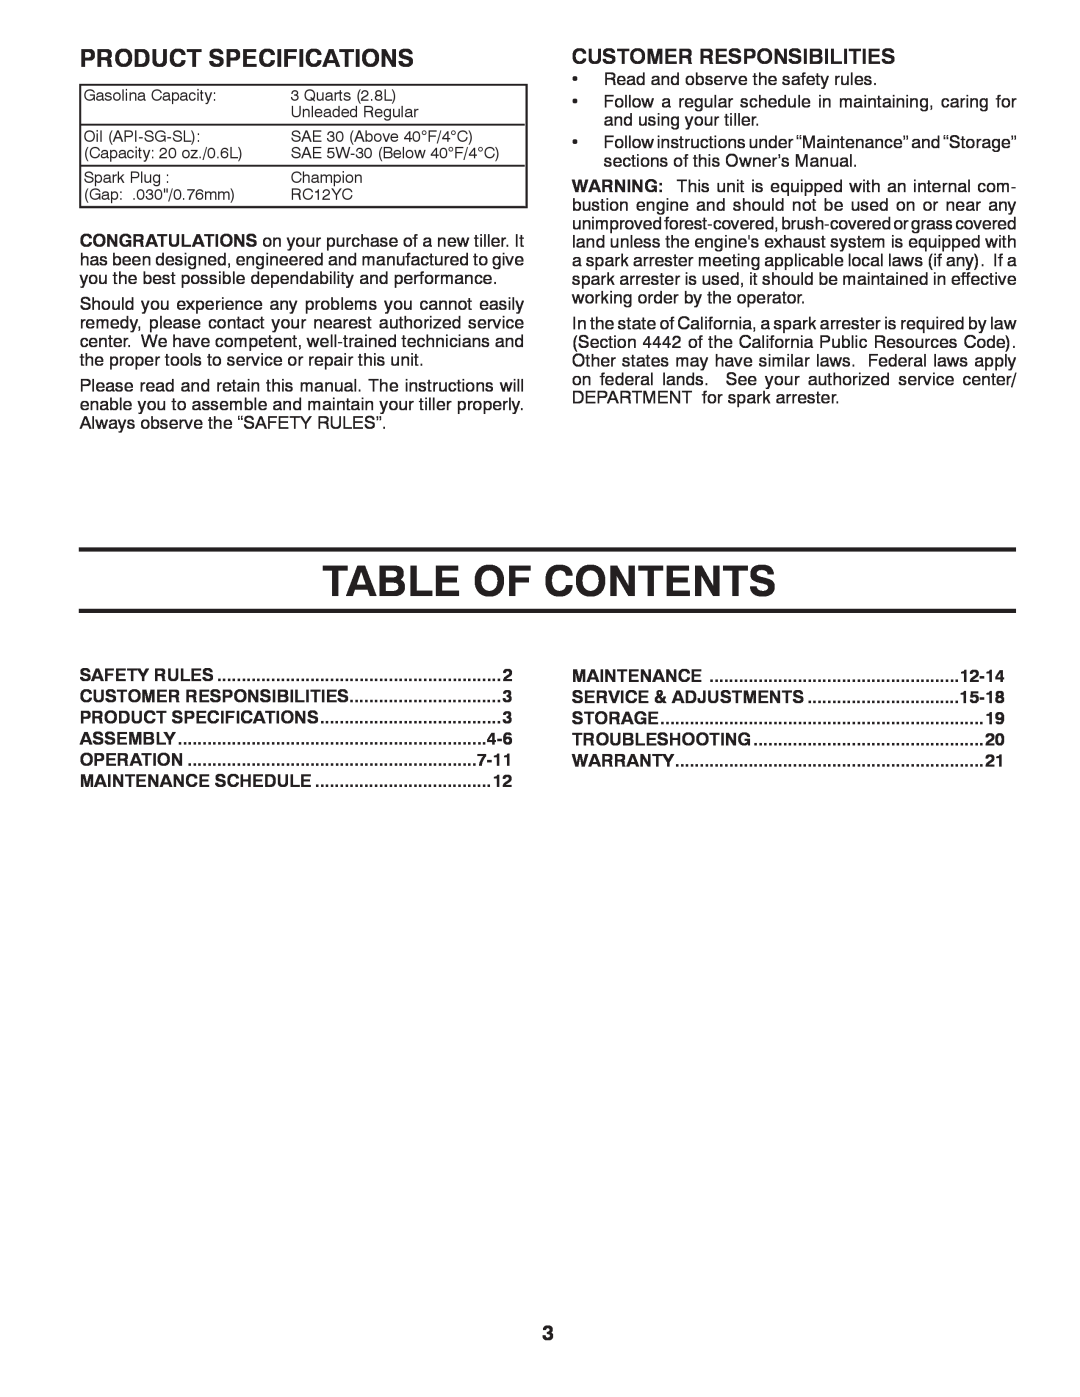 Poulan DRT875 manual Table Of Contents, Product Specifications, Customer Responsibilities, 12-14, 15-18, 7-11 